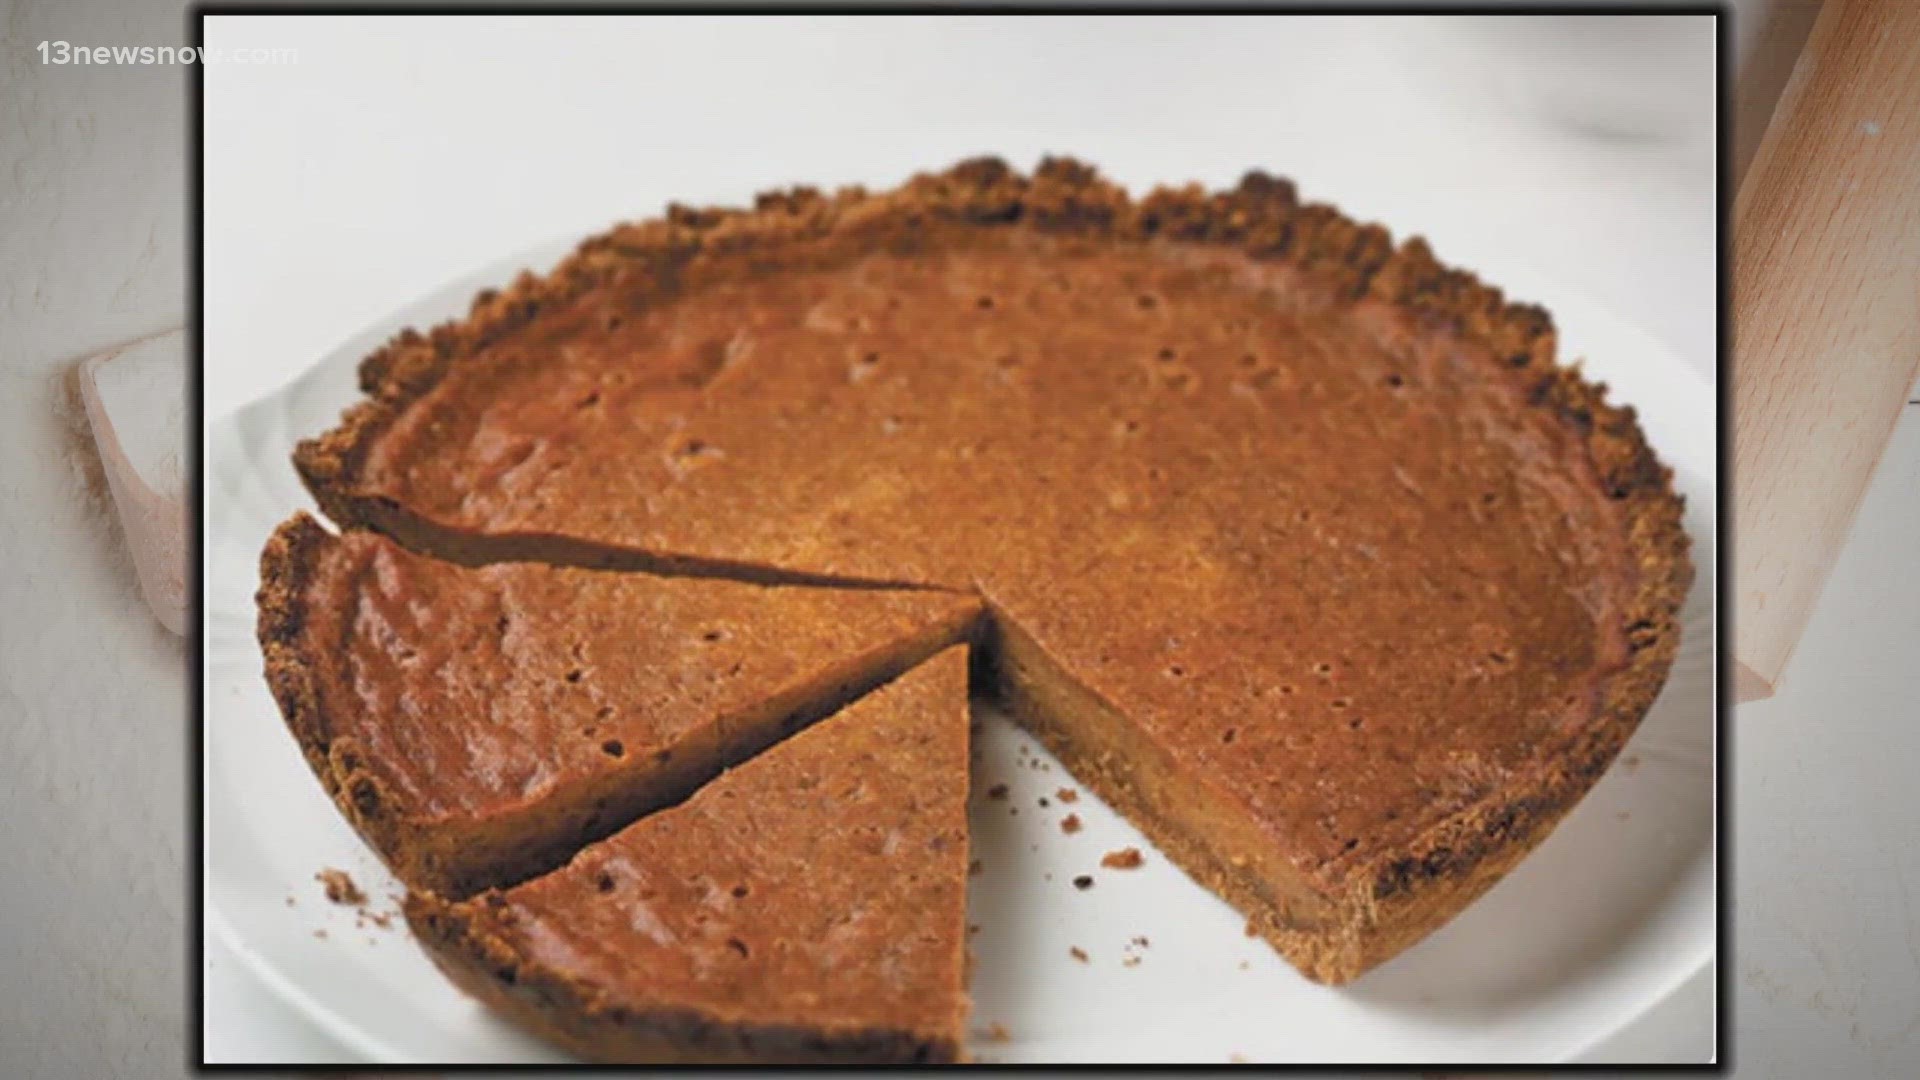 Pumpkin pie is typically lower in sugar and fat than the other holiday favorites. Plus, it gets a nutritional boost from pumpkin puree, which is rich in vitamin A.